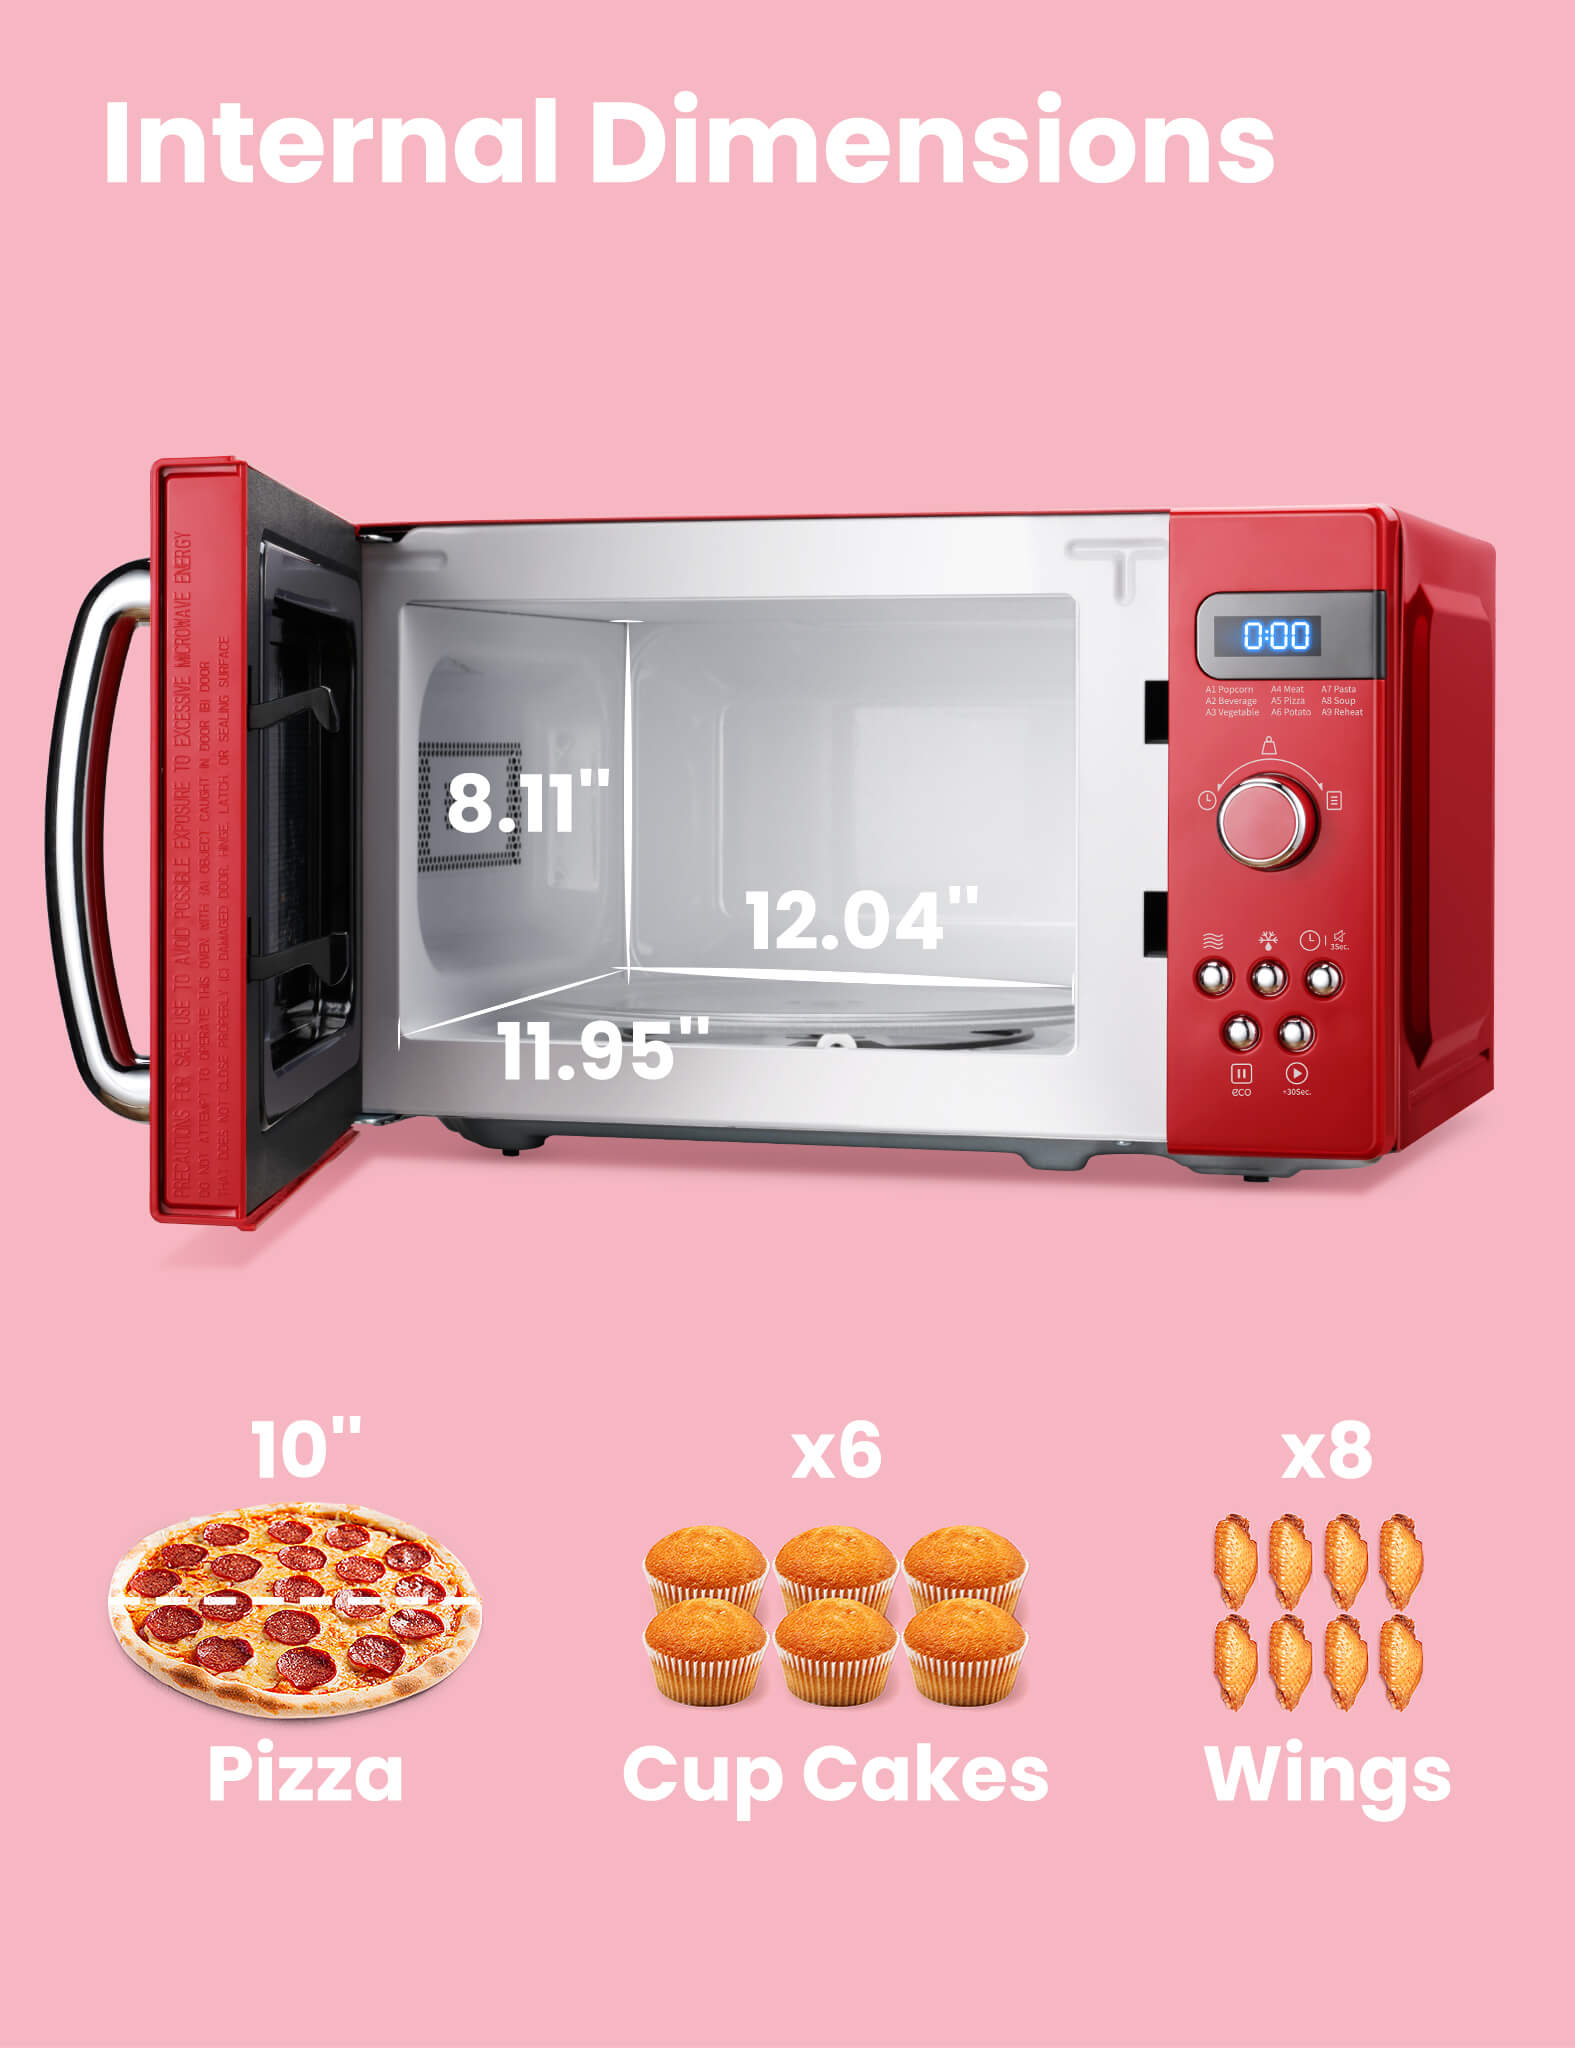 internal dimension of red microwave oven